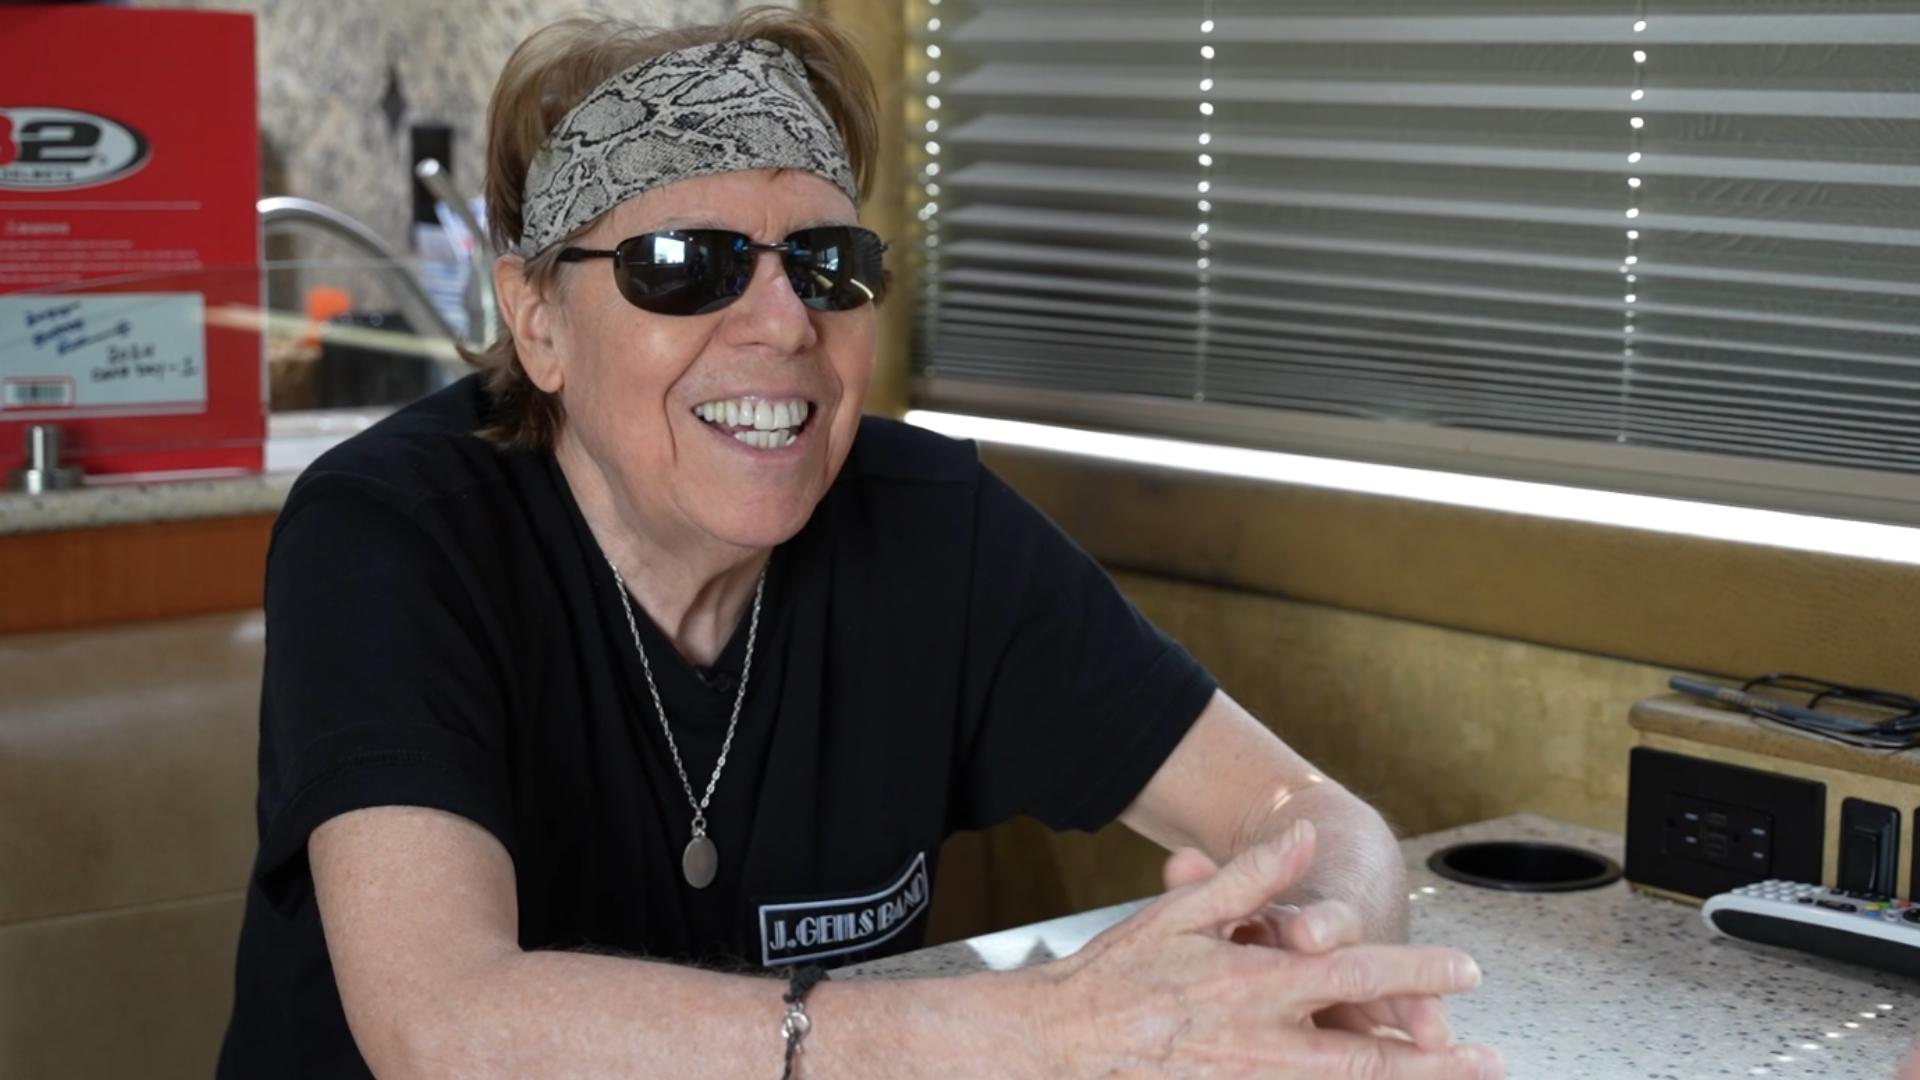 13News anchor Jennie Runevitch interviews George Thorogood before his concert on Carb Day at the Indianapolis Motor Speedway on Friday, May 24, 2024.